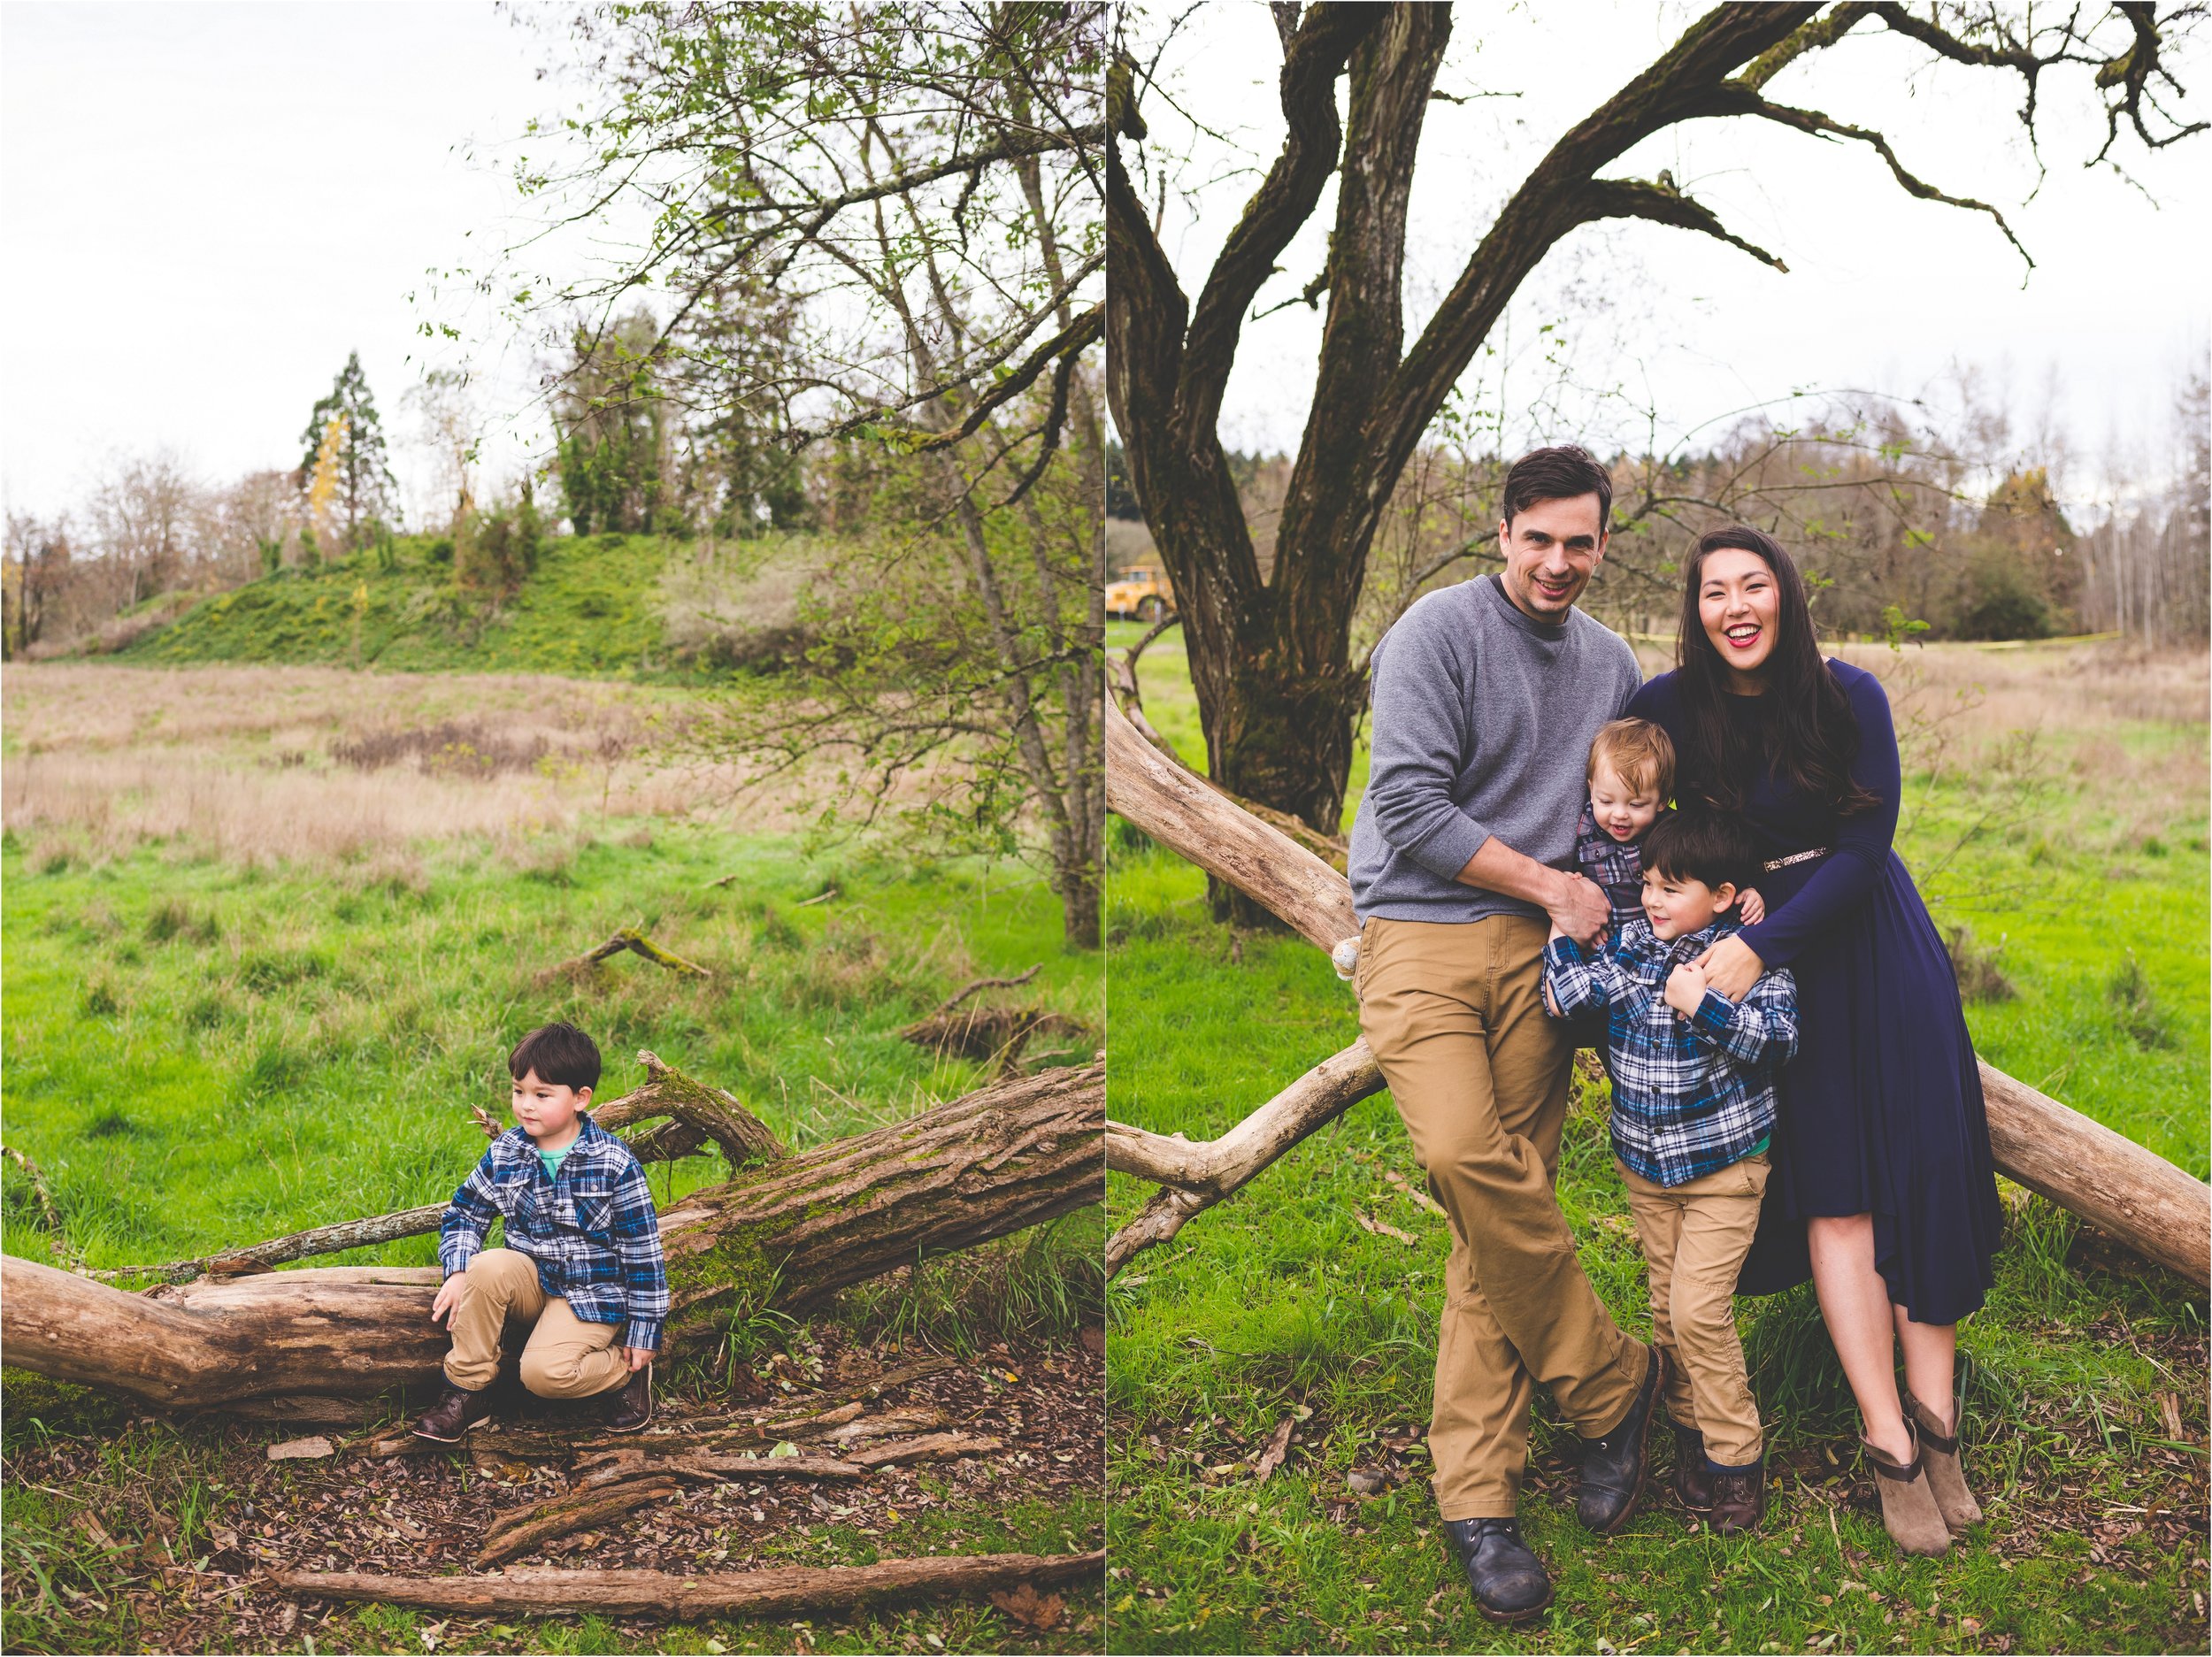 fort-steilacoom-park-family-session-jannicka-mayte-pacific-northwest-lifestyle-photographer_0034.jpg